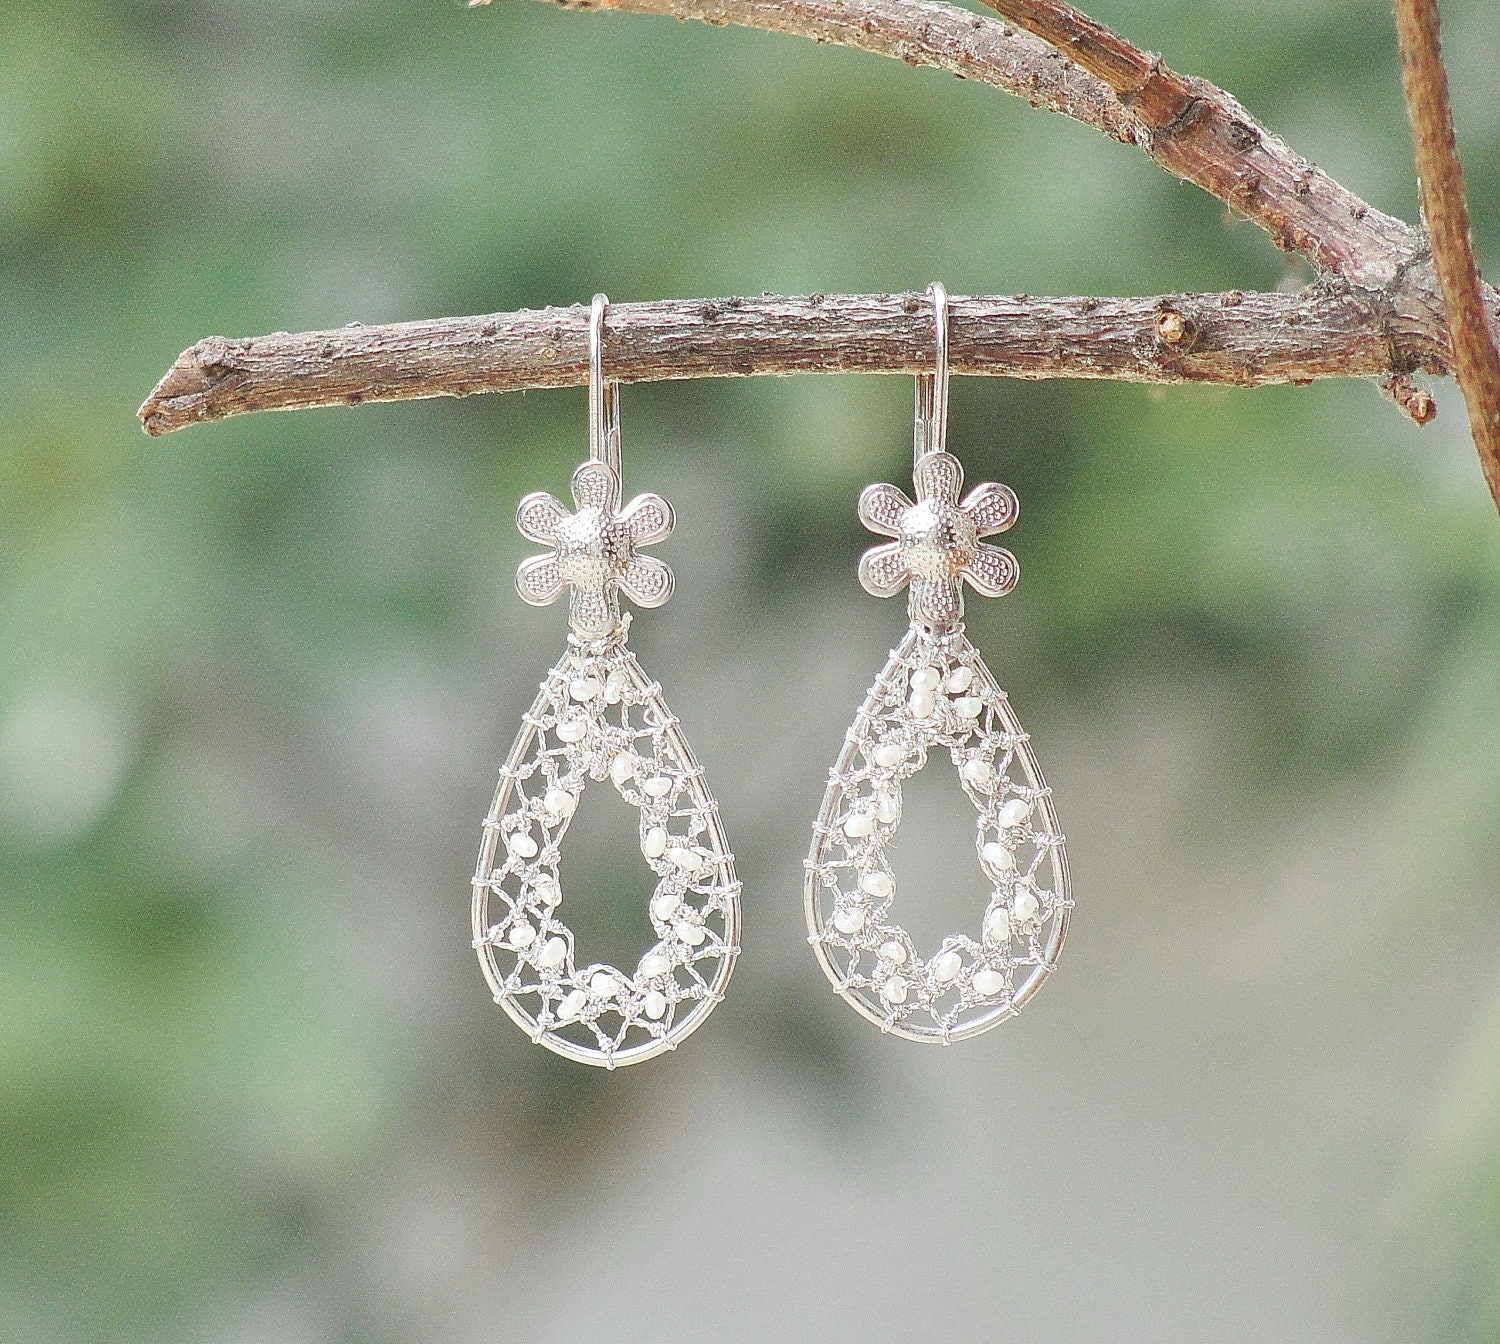 Drops of Dreams - Needle Lace Earrings with Tiny Sweet Water Pearls - StaroftheEast